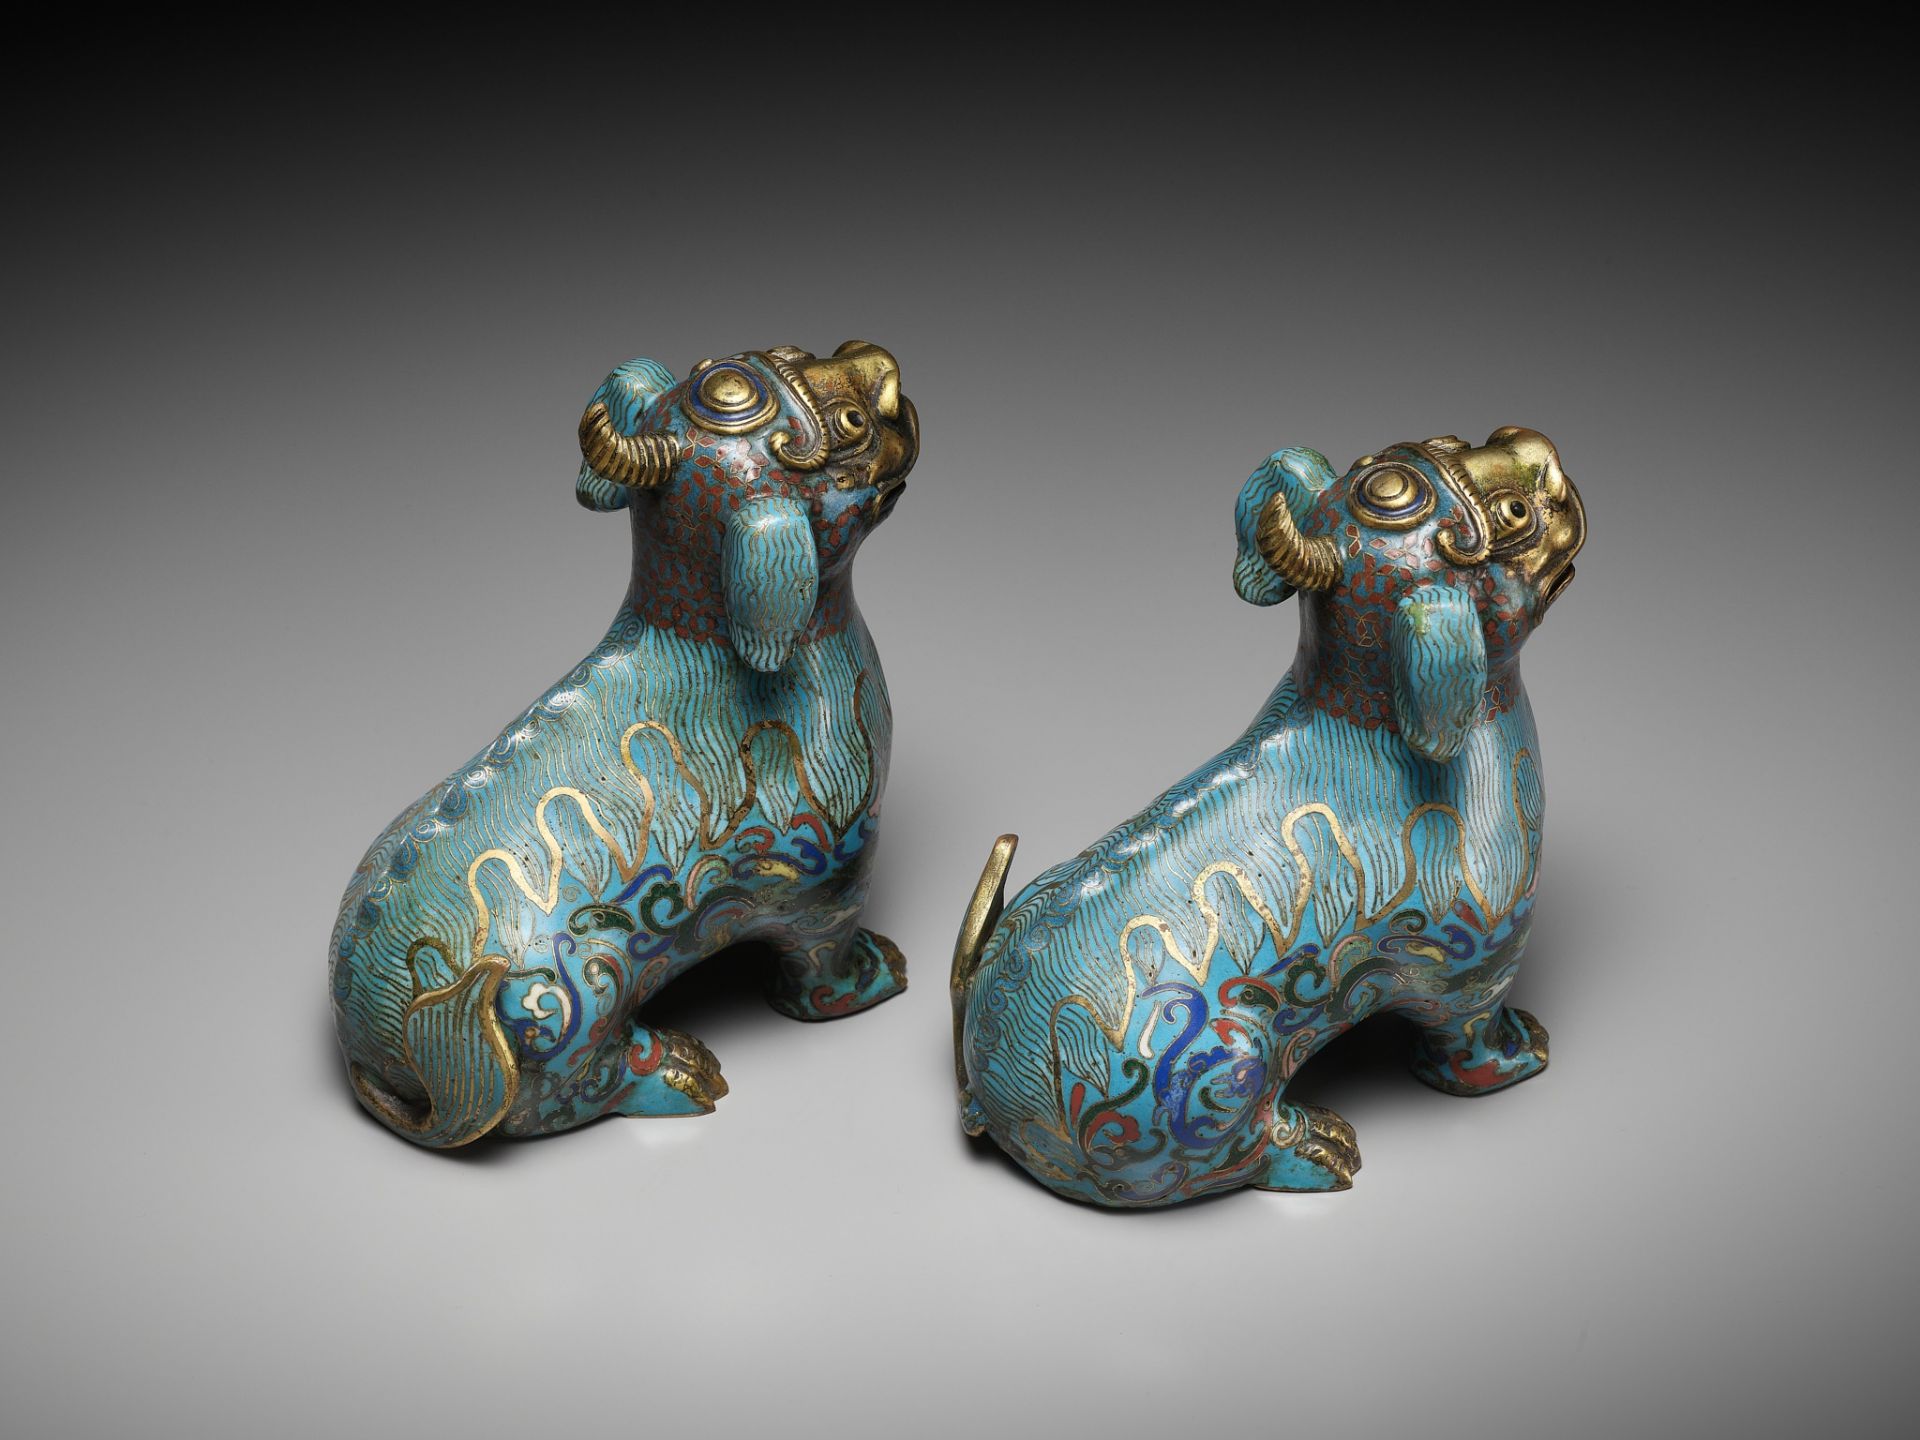 A PAIR OF GILT-BRONZE AND CLOISONNE ENAMEL LUDUAN, CHINA, 18TH - 19TH CENTURY - Image 10 of 11